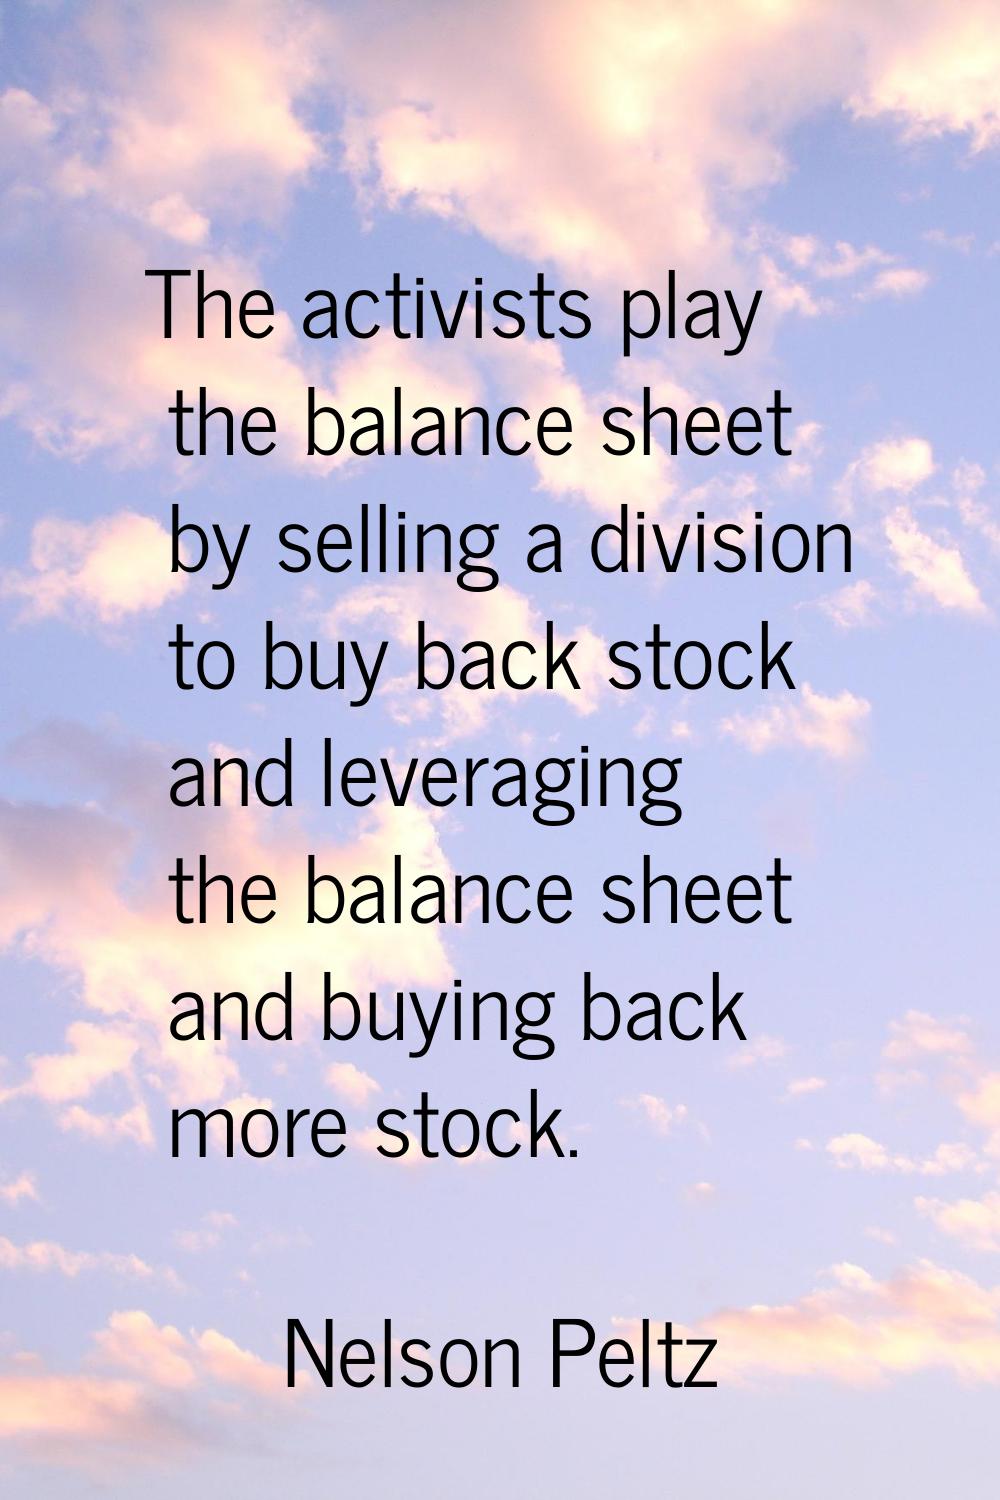 The activists play the balance sheet by selling a division to buy back stock and leveraging the bal